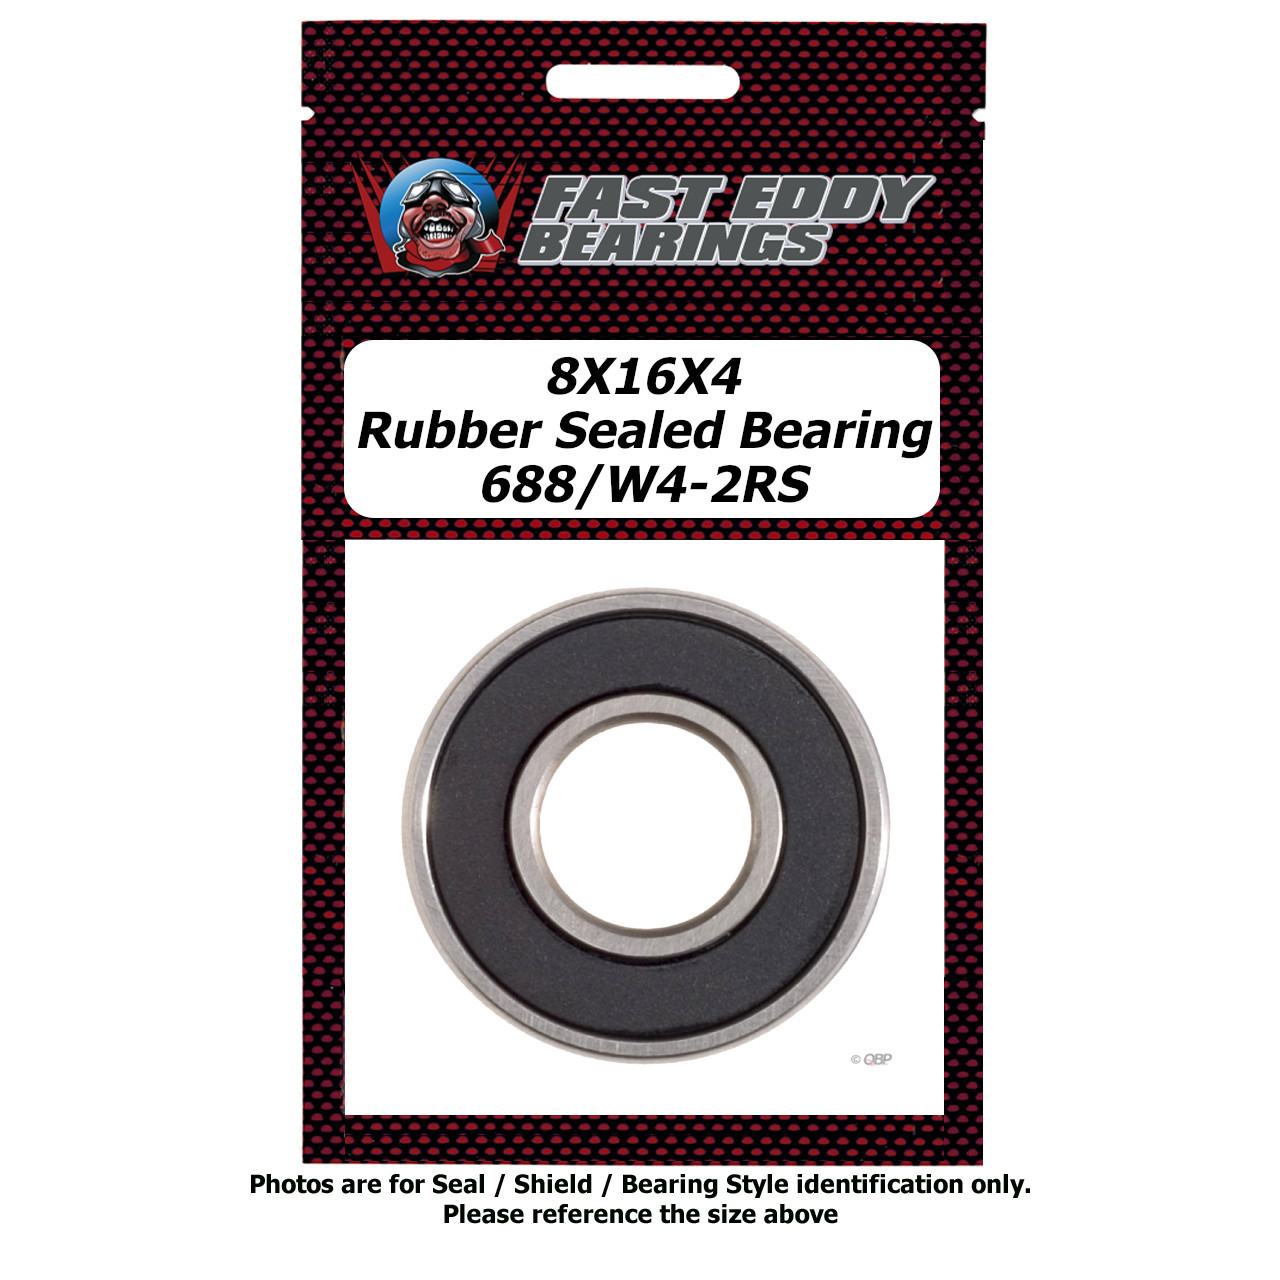 8X16X4 Rubber Sealed Bearing 688/W4-2RS